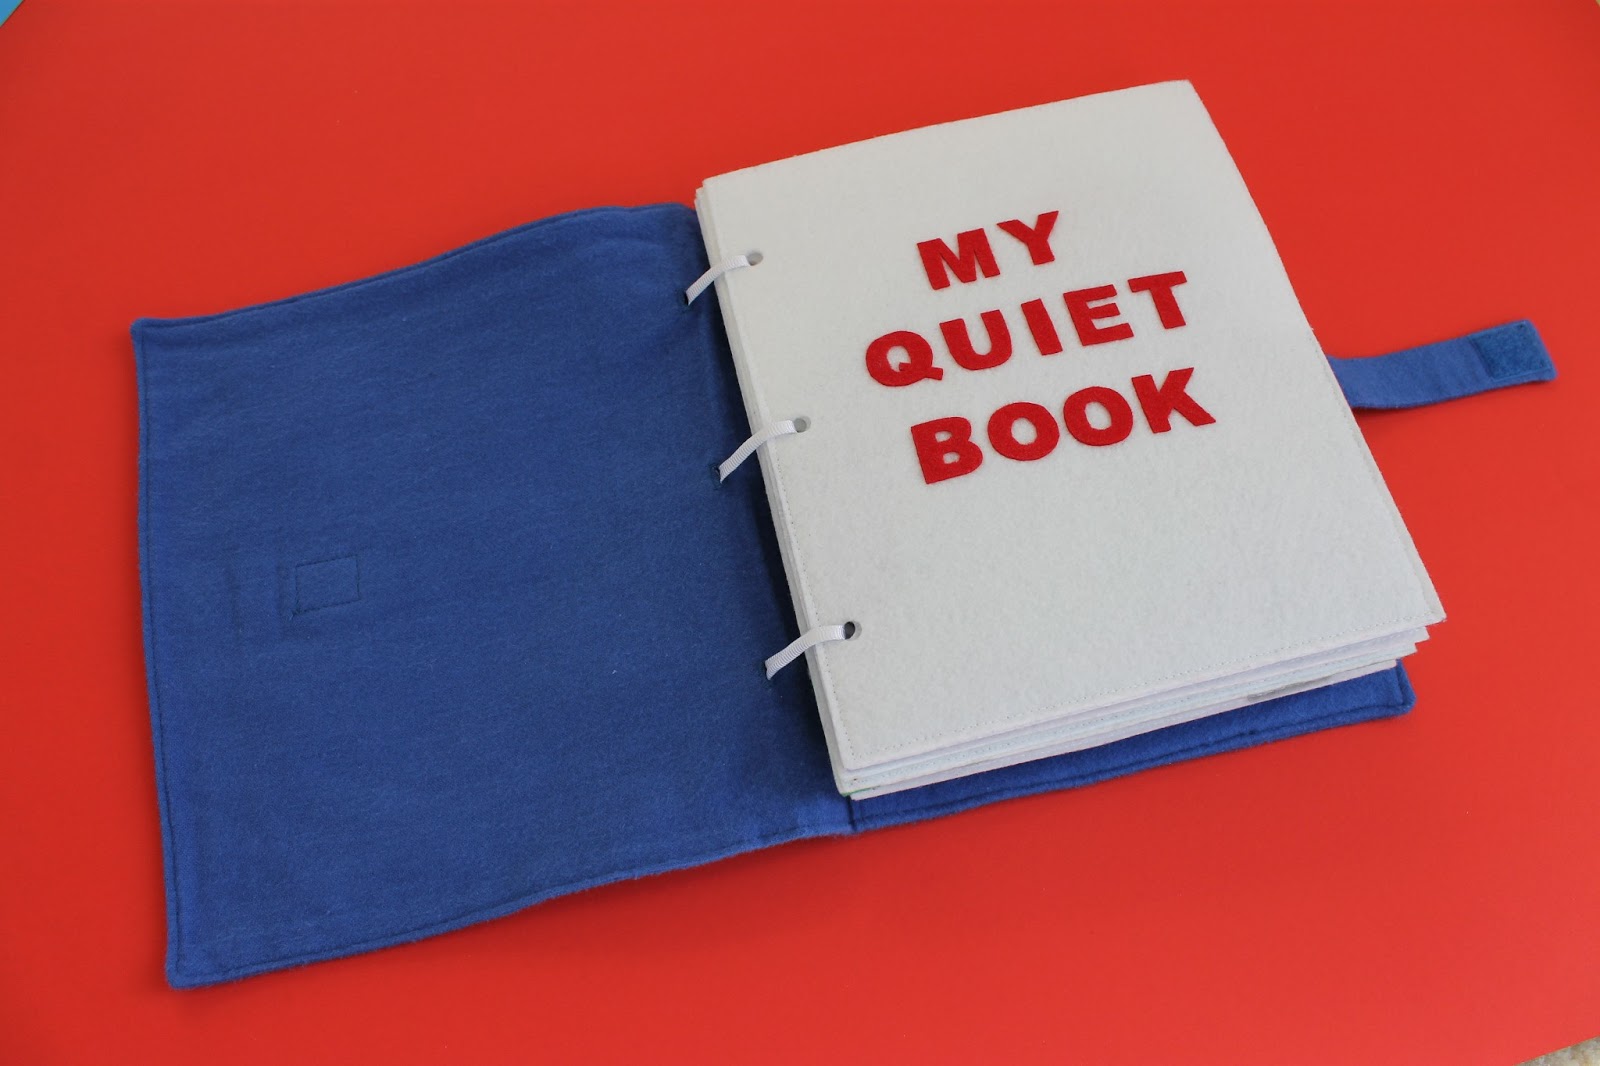 How to Bind a Quiet Book - Sew Much to Create Quiet Books